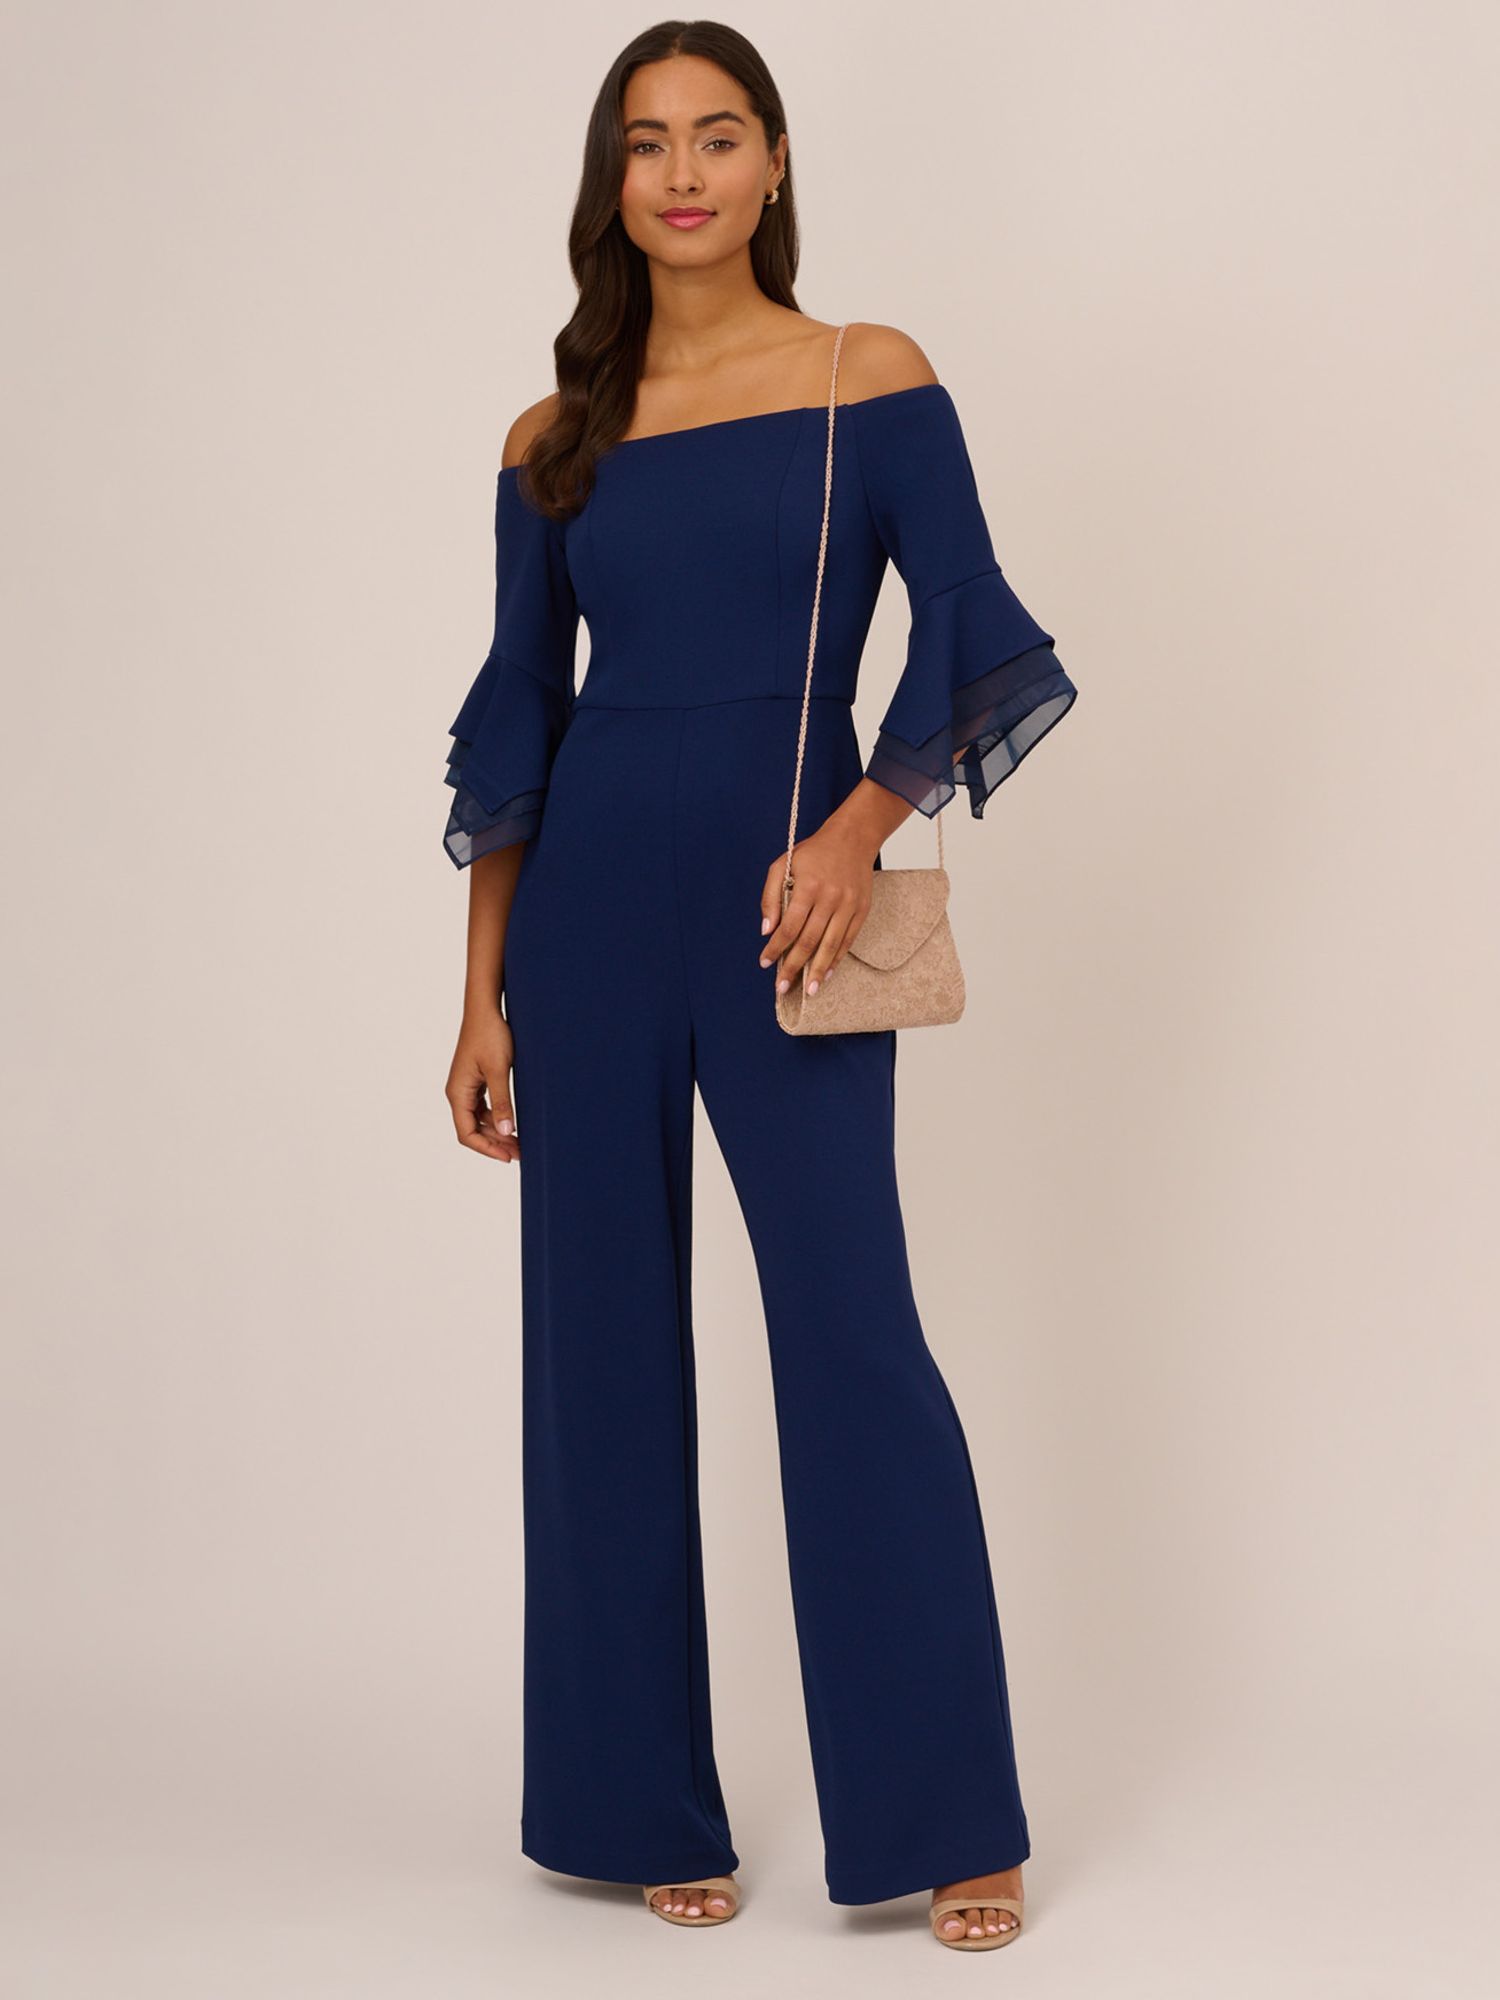 Adrianna Papell Organza Crepe Jumpsuit, Navy, 6